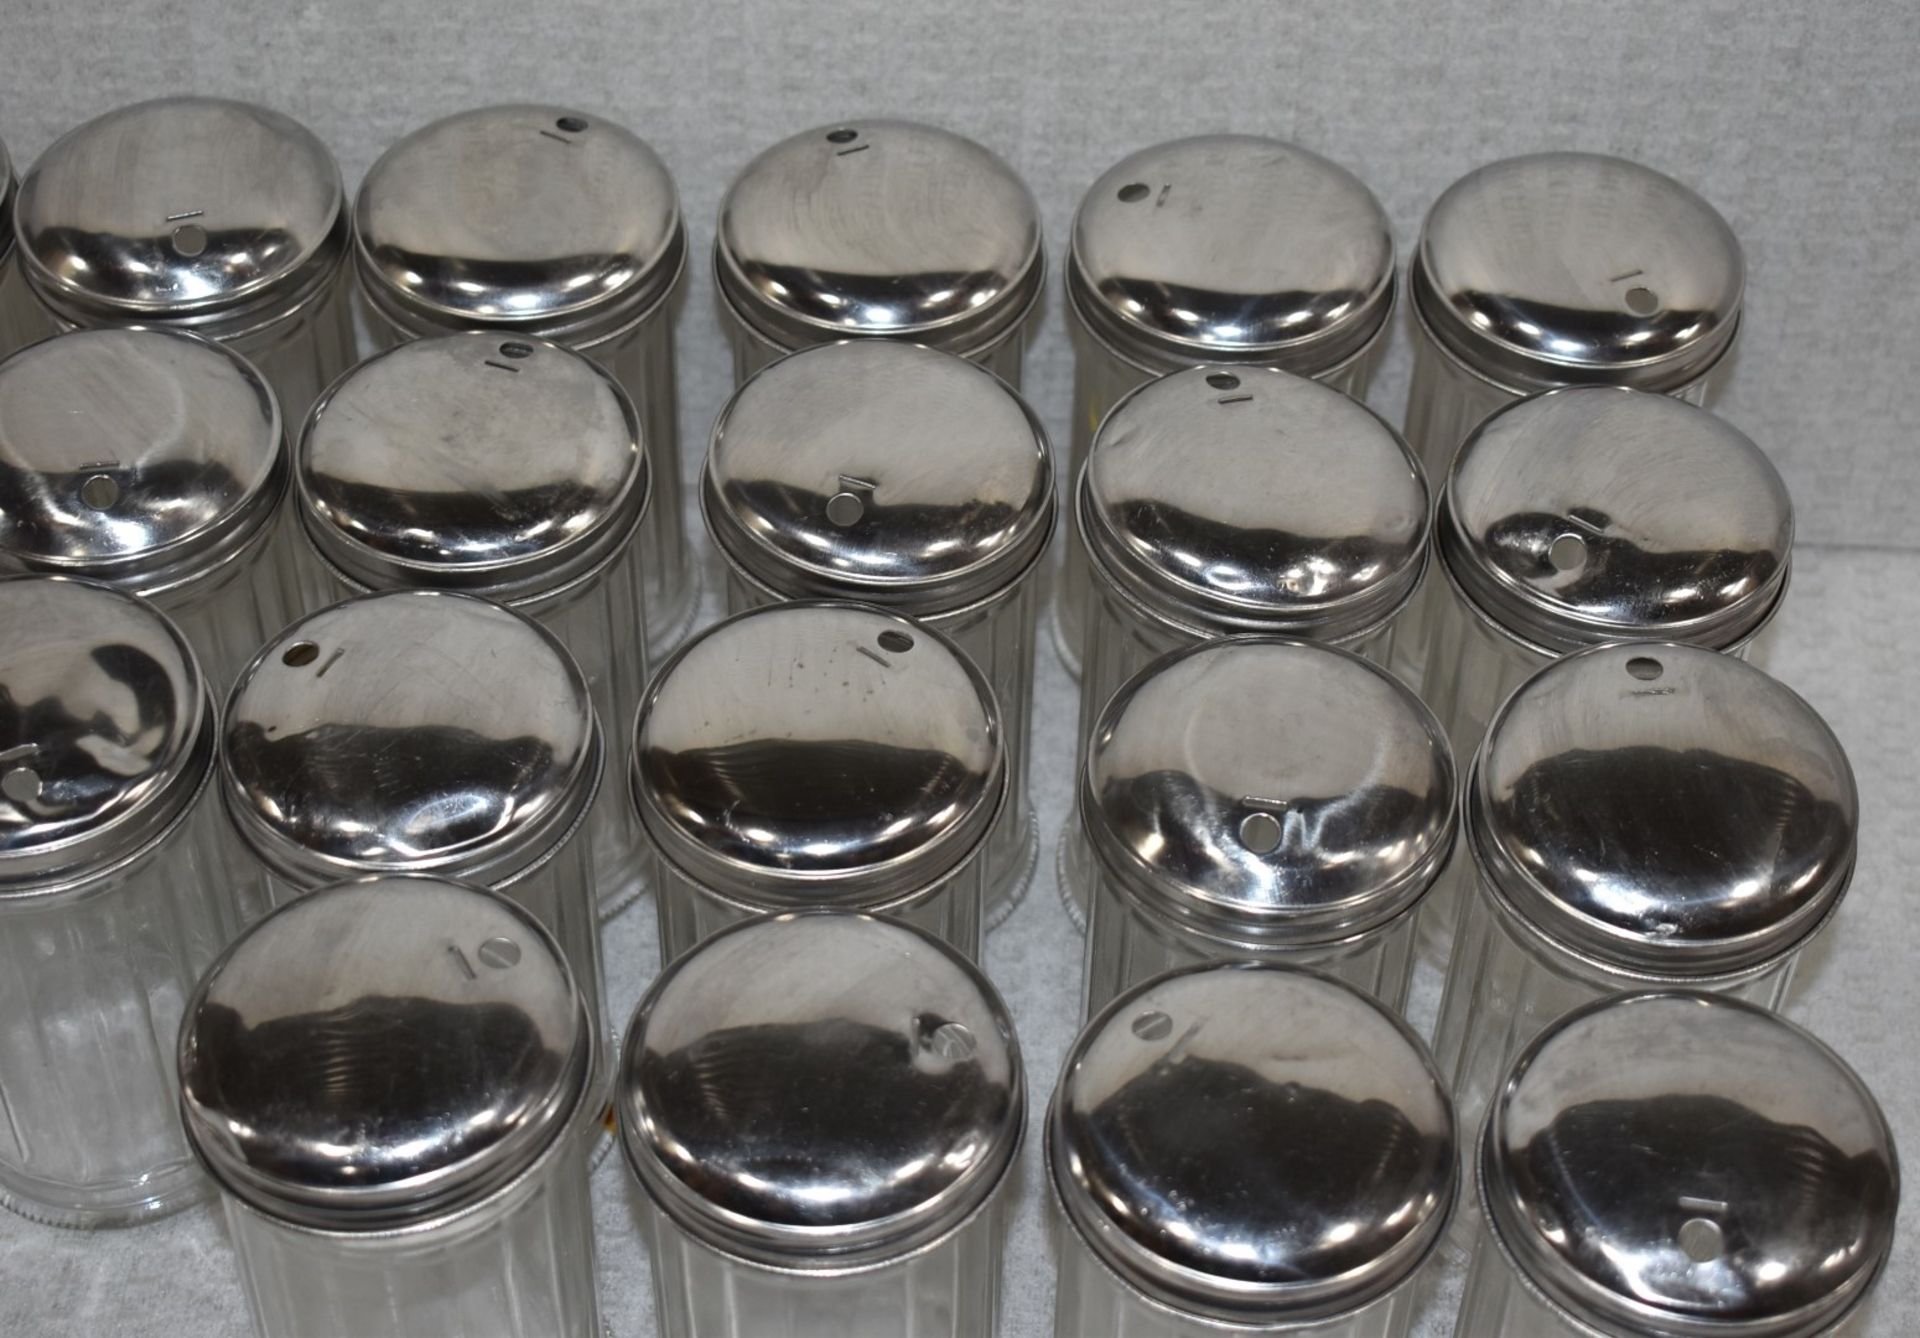 22 x Glass Sugar Dispensing Pots With Stainless Steel Lids - Suitable For Cafes or Restaurants - Image 2 of 5